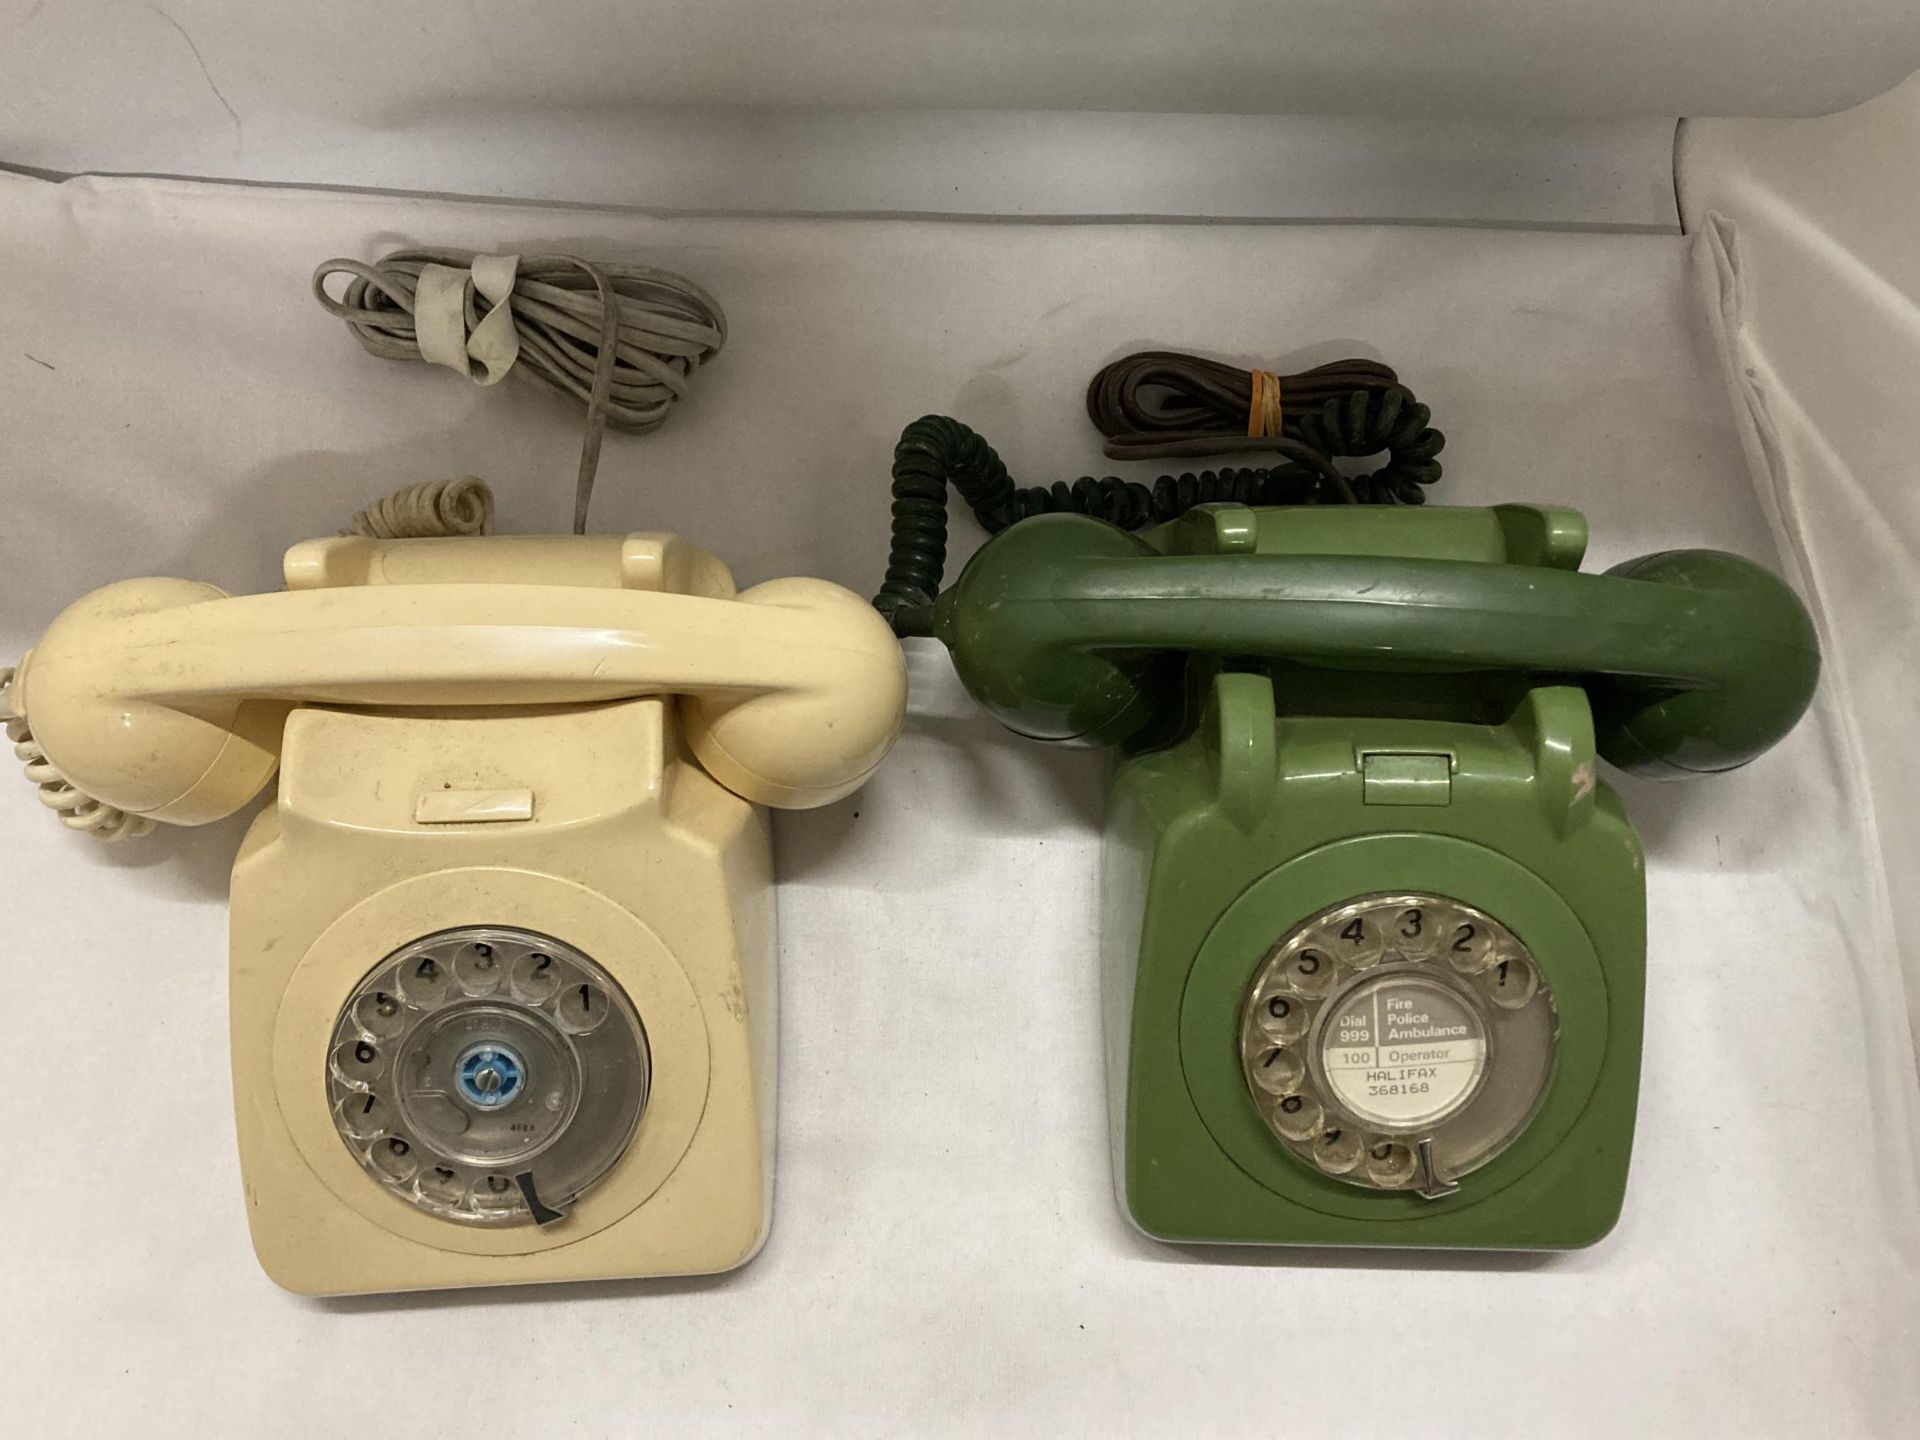 TWO VINTAGE DIAL UP TELEPHONES - CREAM AND GREEN - Image 2 of 4